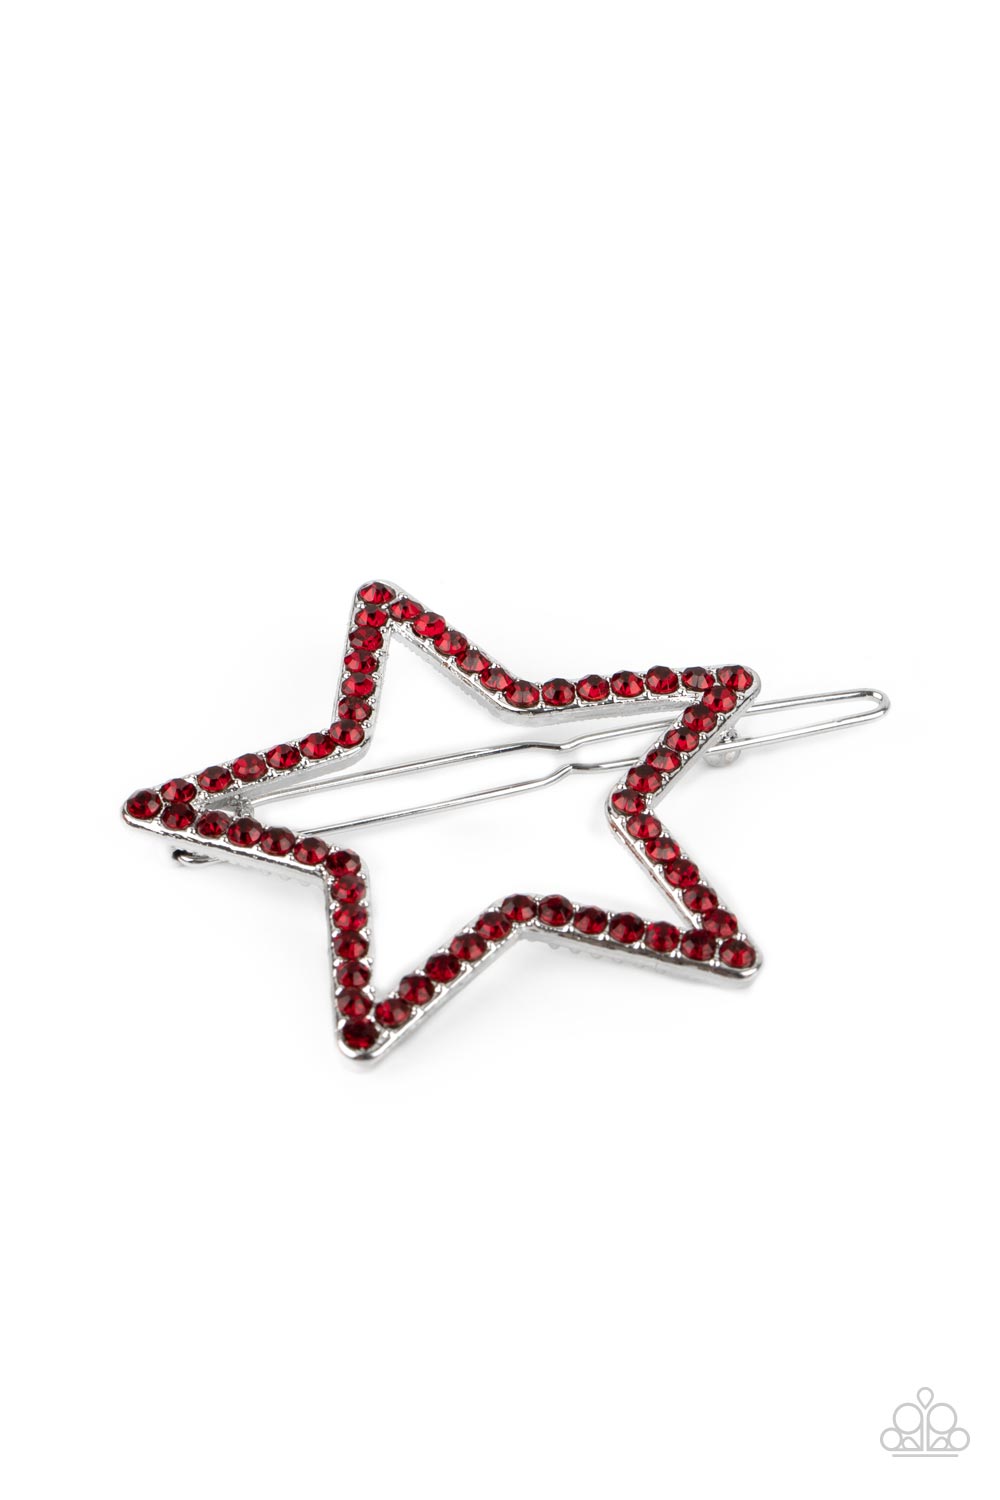 HairClip - Stellar Standout - Red